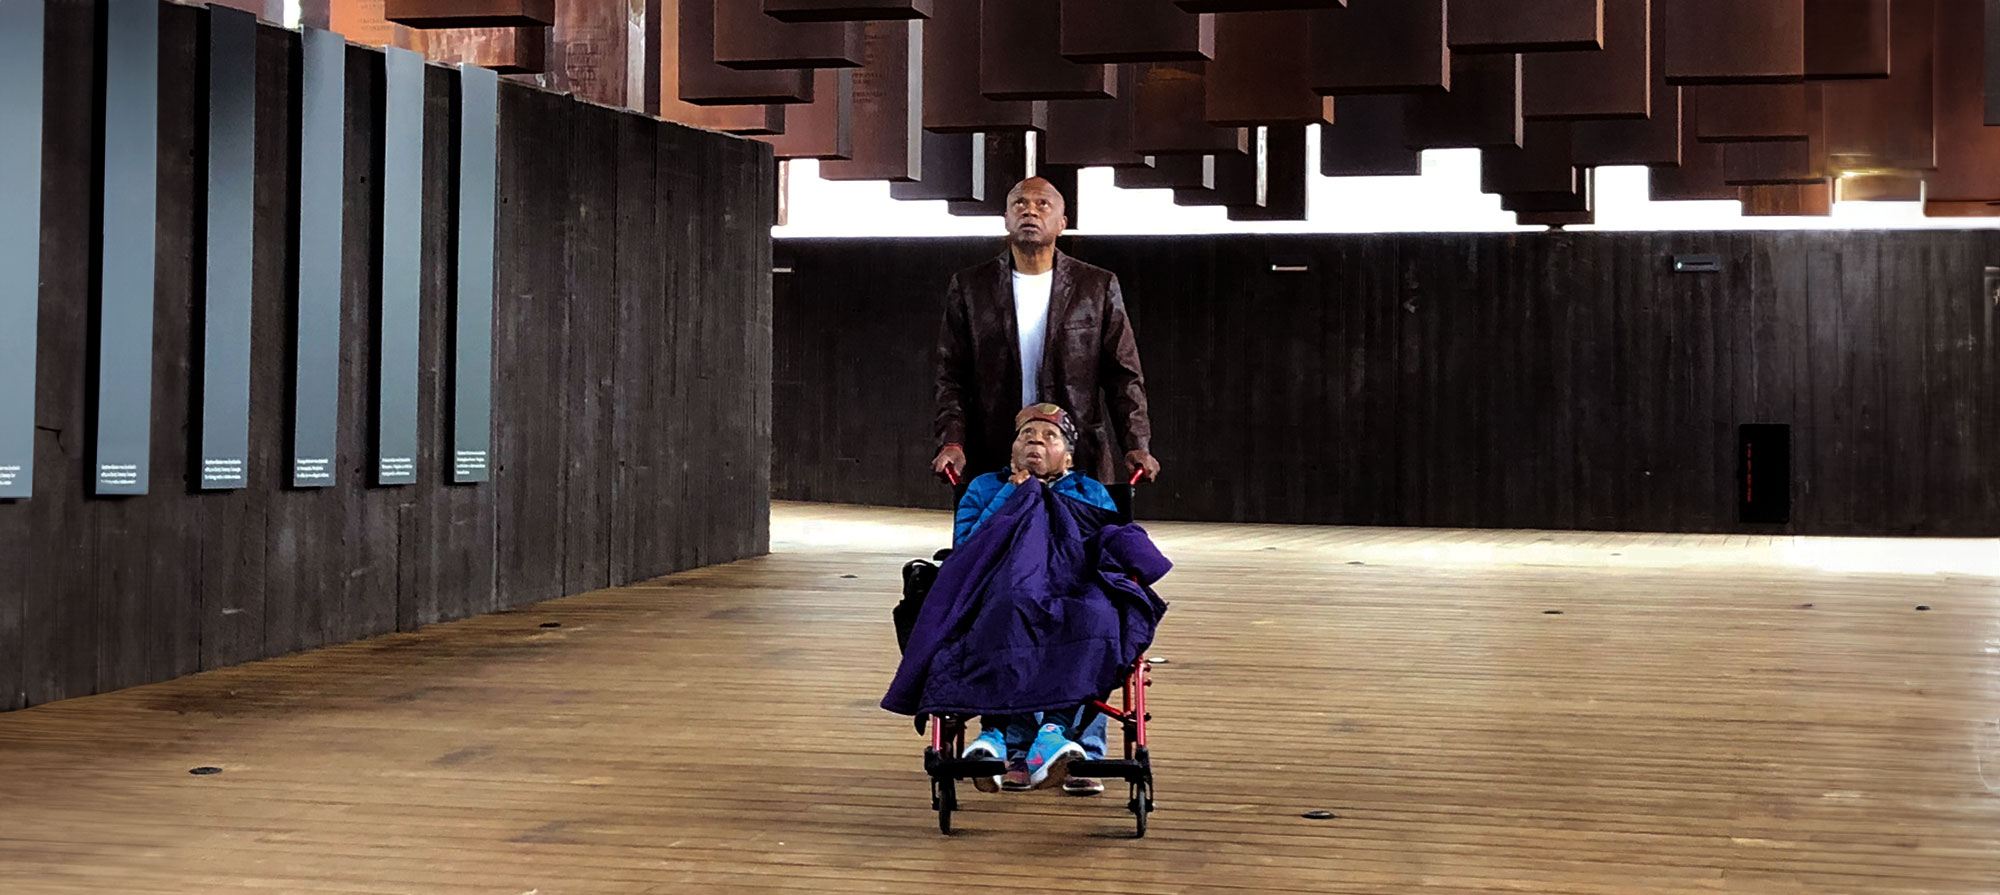 Mamie Kirkland, 109 years old, visits the National Memorial using a wheelchair pushed by her son, Tarabu Kirkland, in 2018.